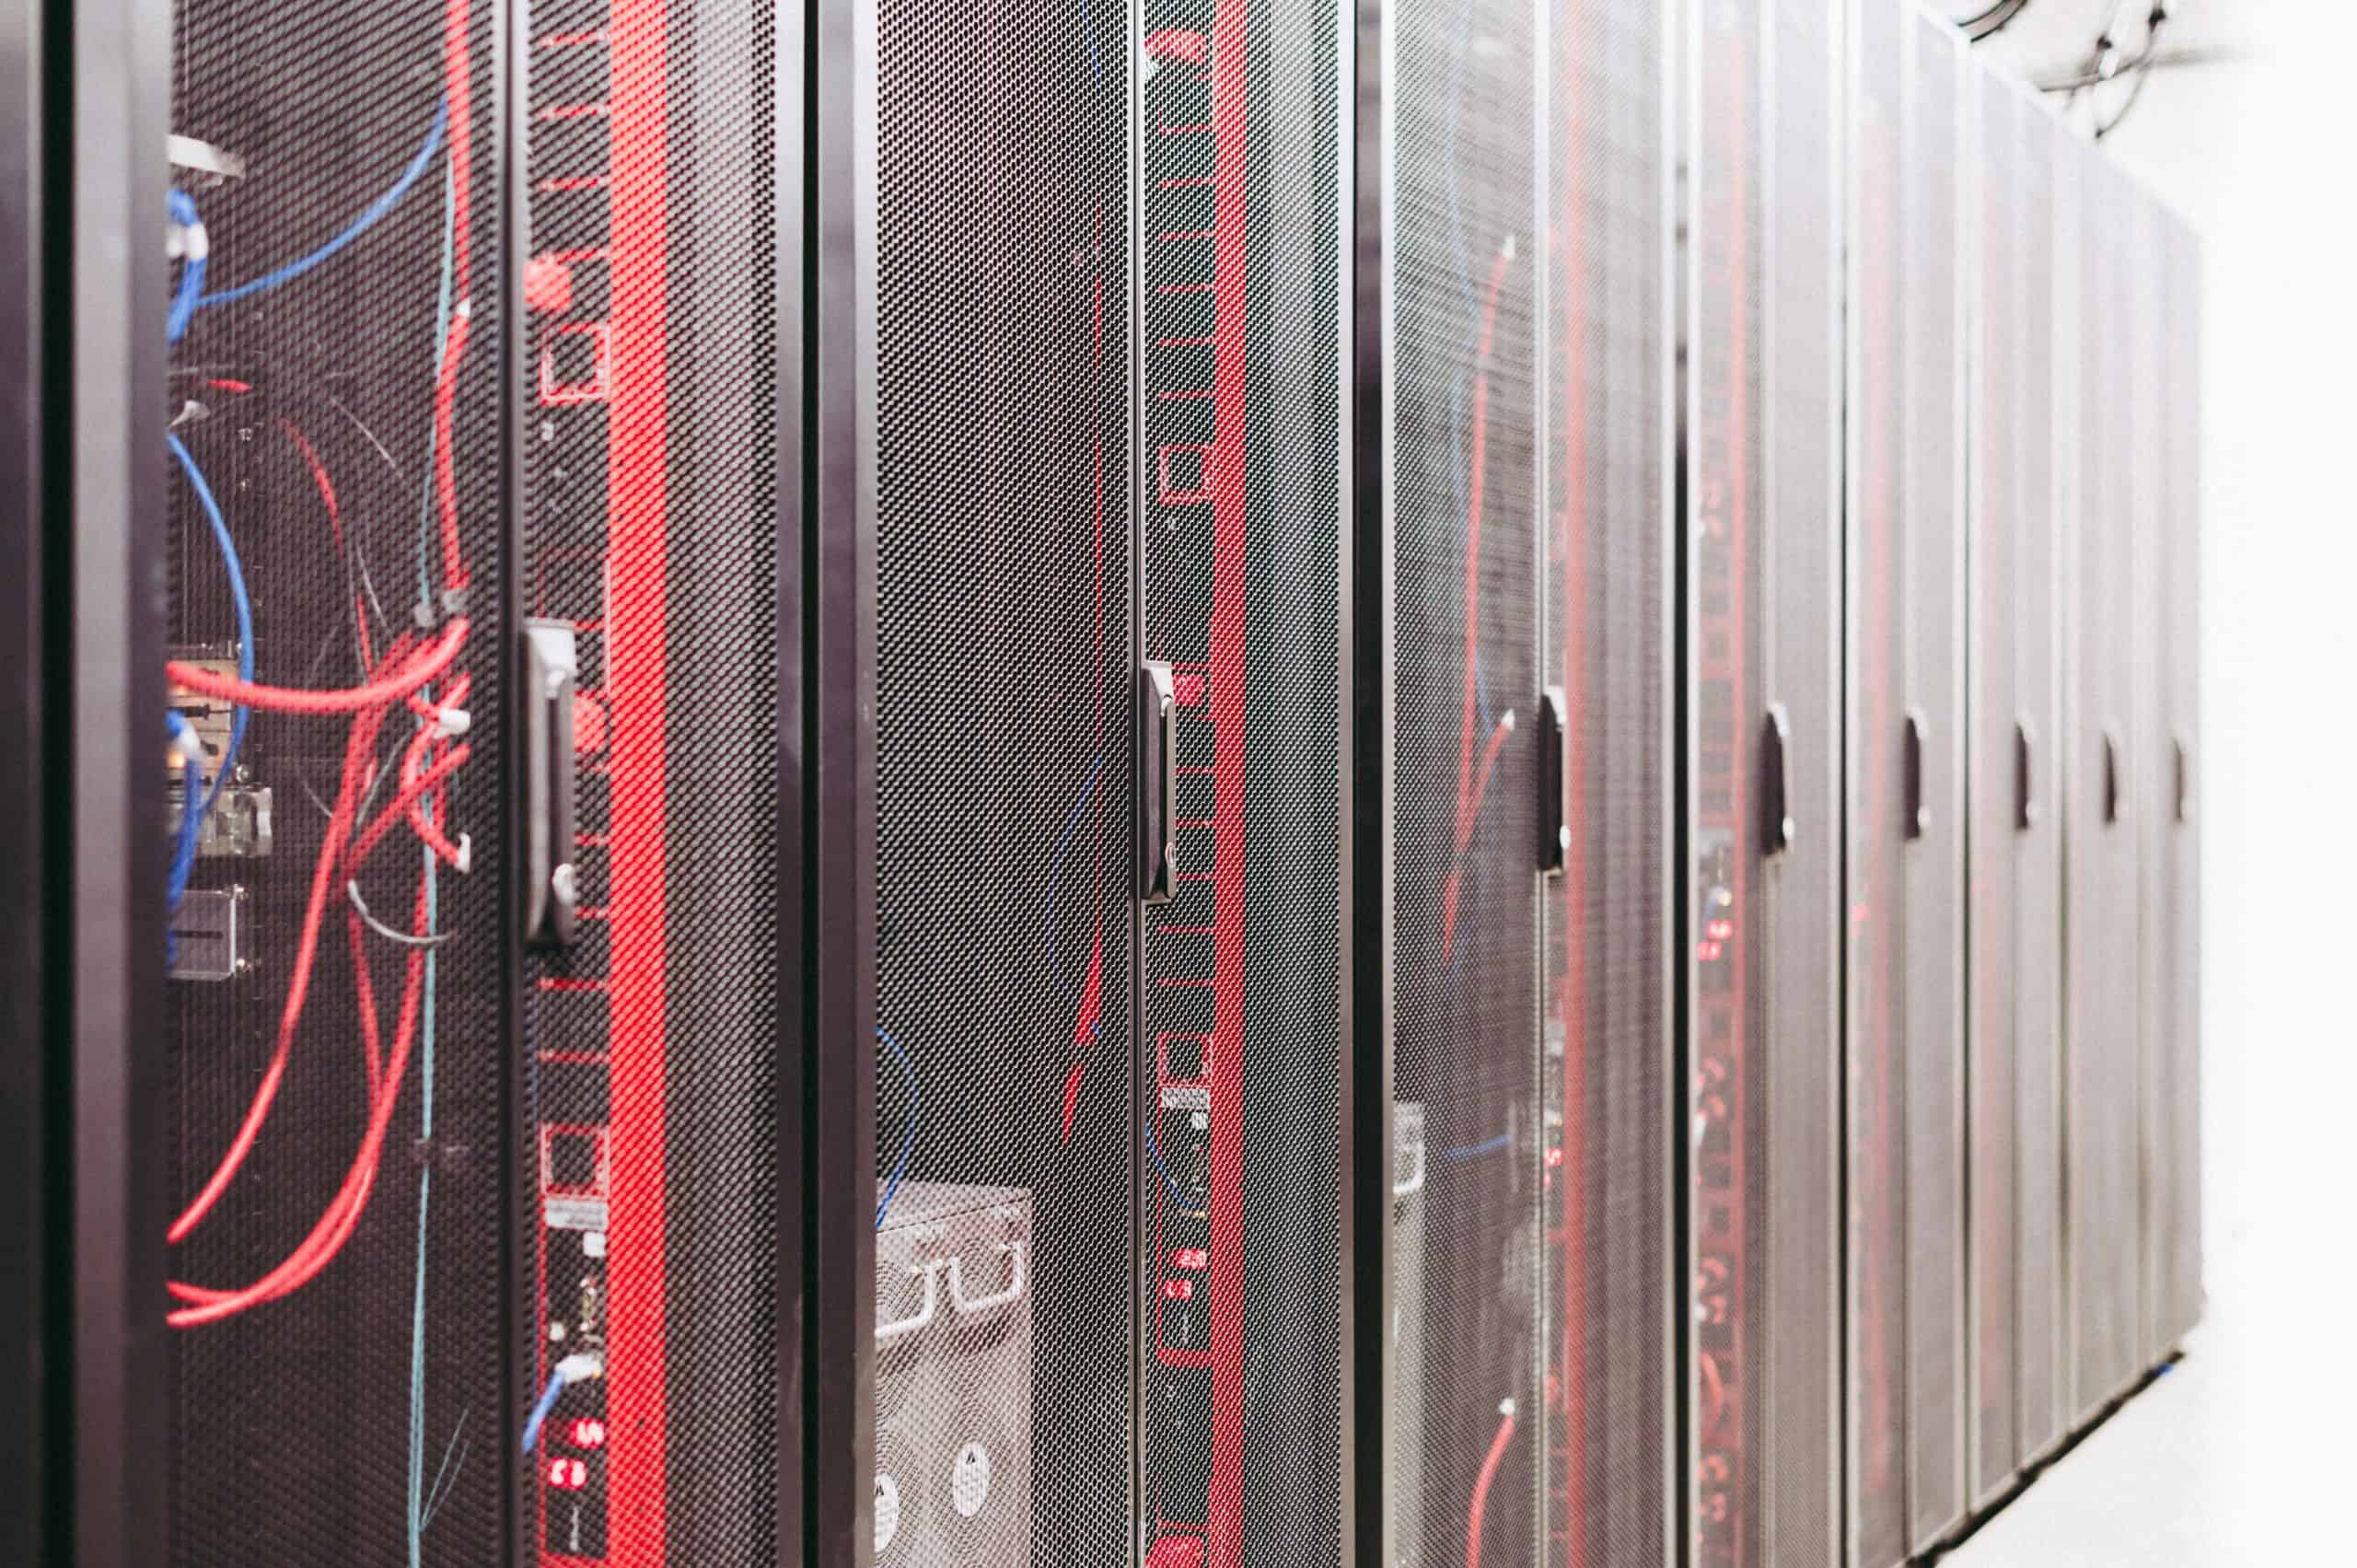 Extreme weather is heavily impacting data centres across Ontario